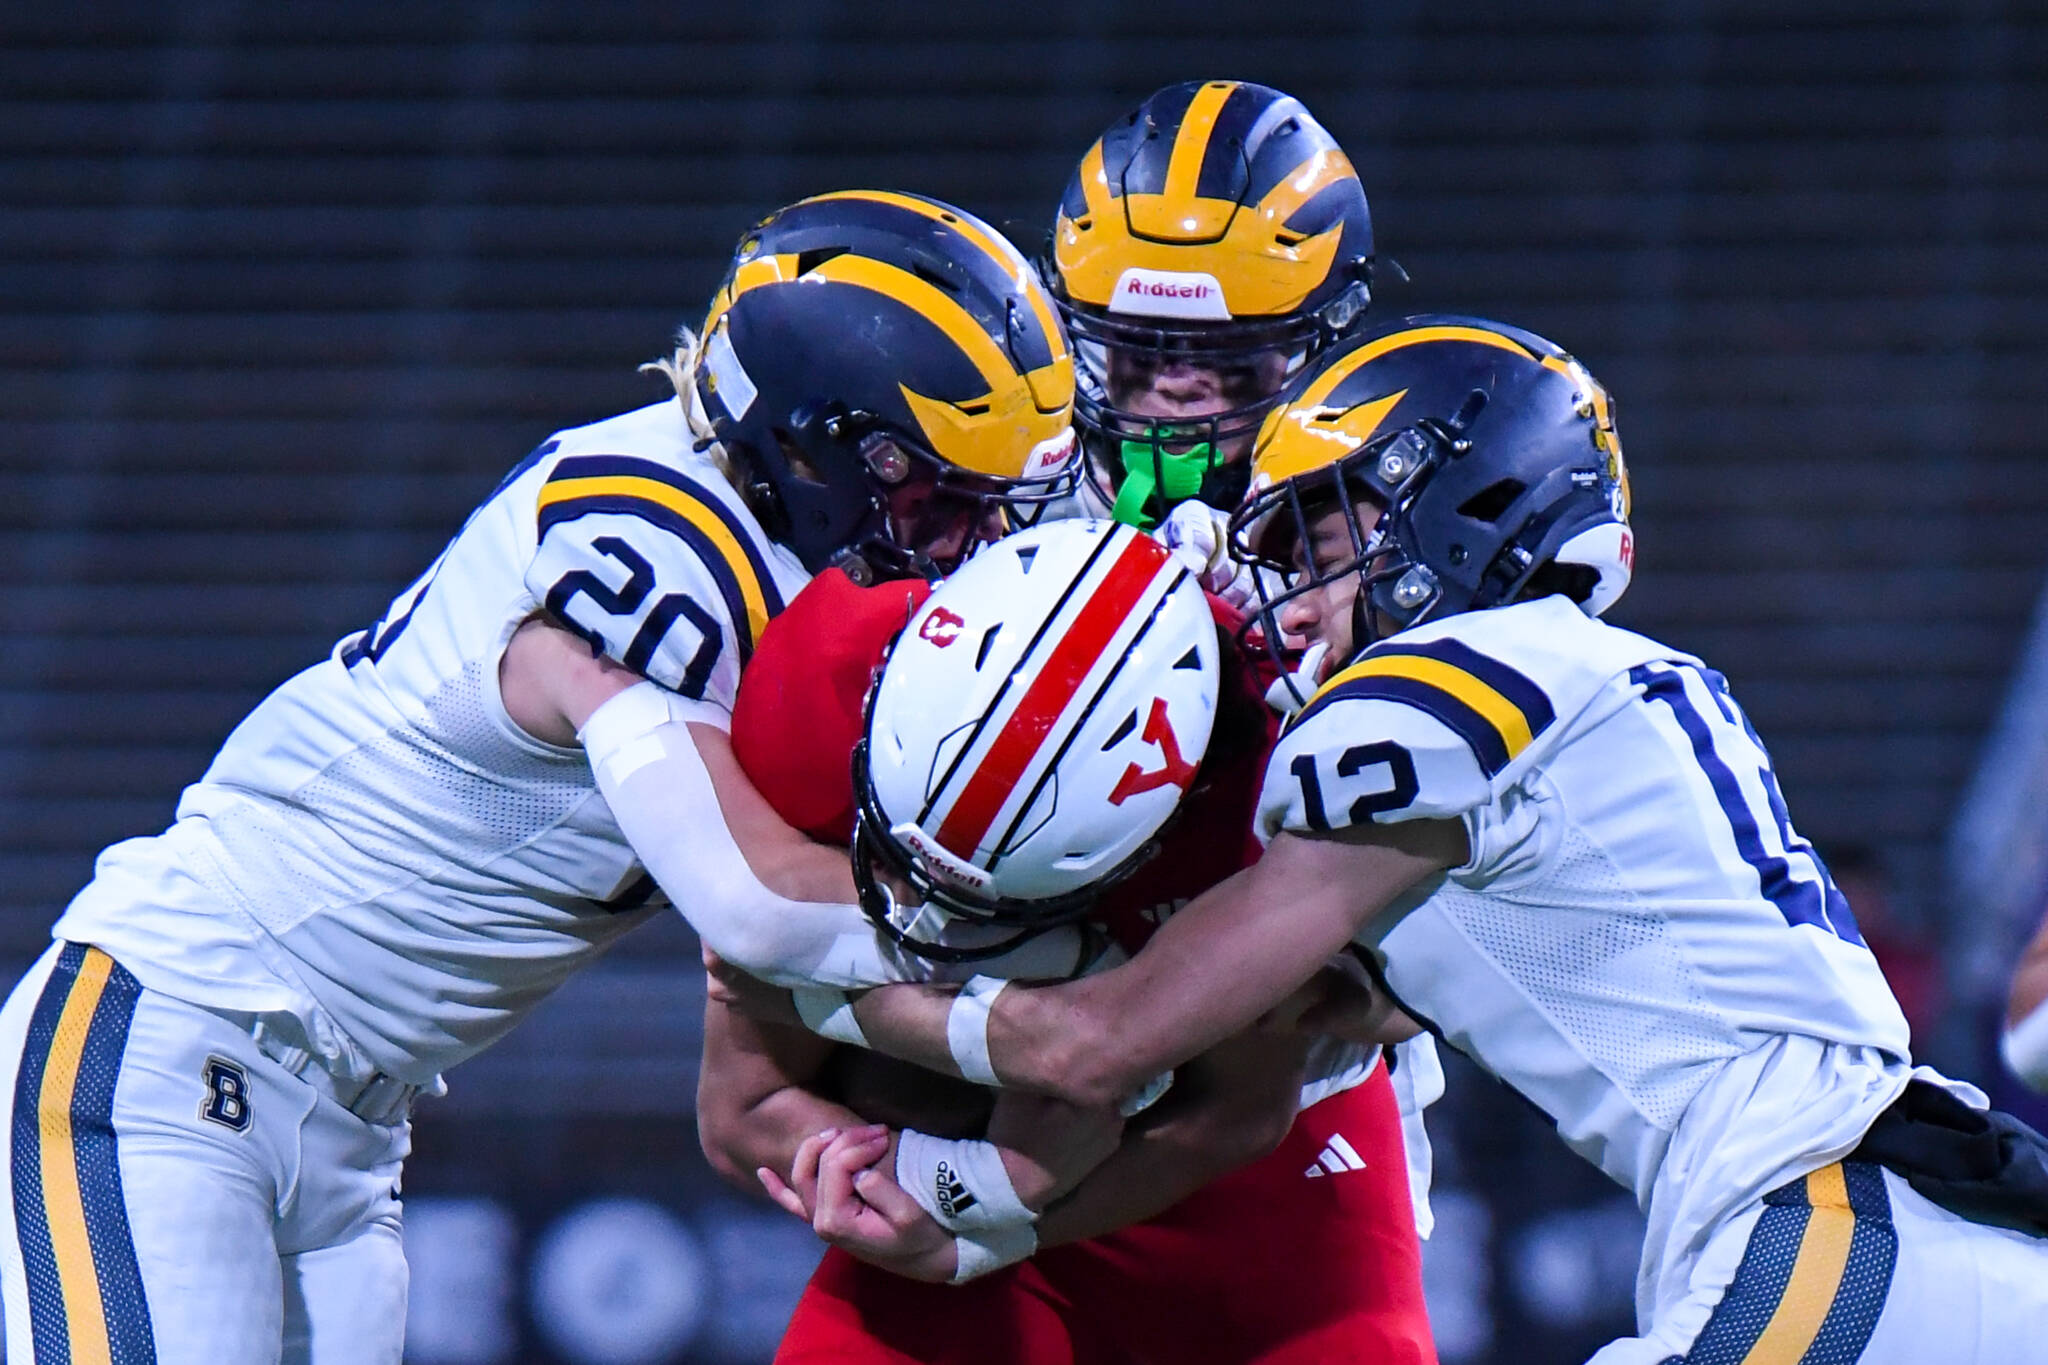 Three Bellevue players combine to stop Yelm quarterback Damian Aalona’s run, including, at left, Tate Hauser, and at right, Bryce Smith. Photo courtesy of Stephanie Ault Justus